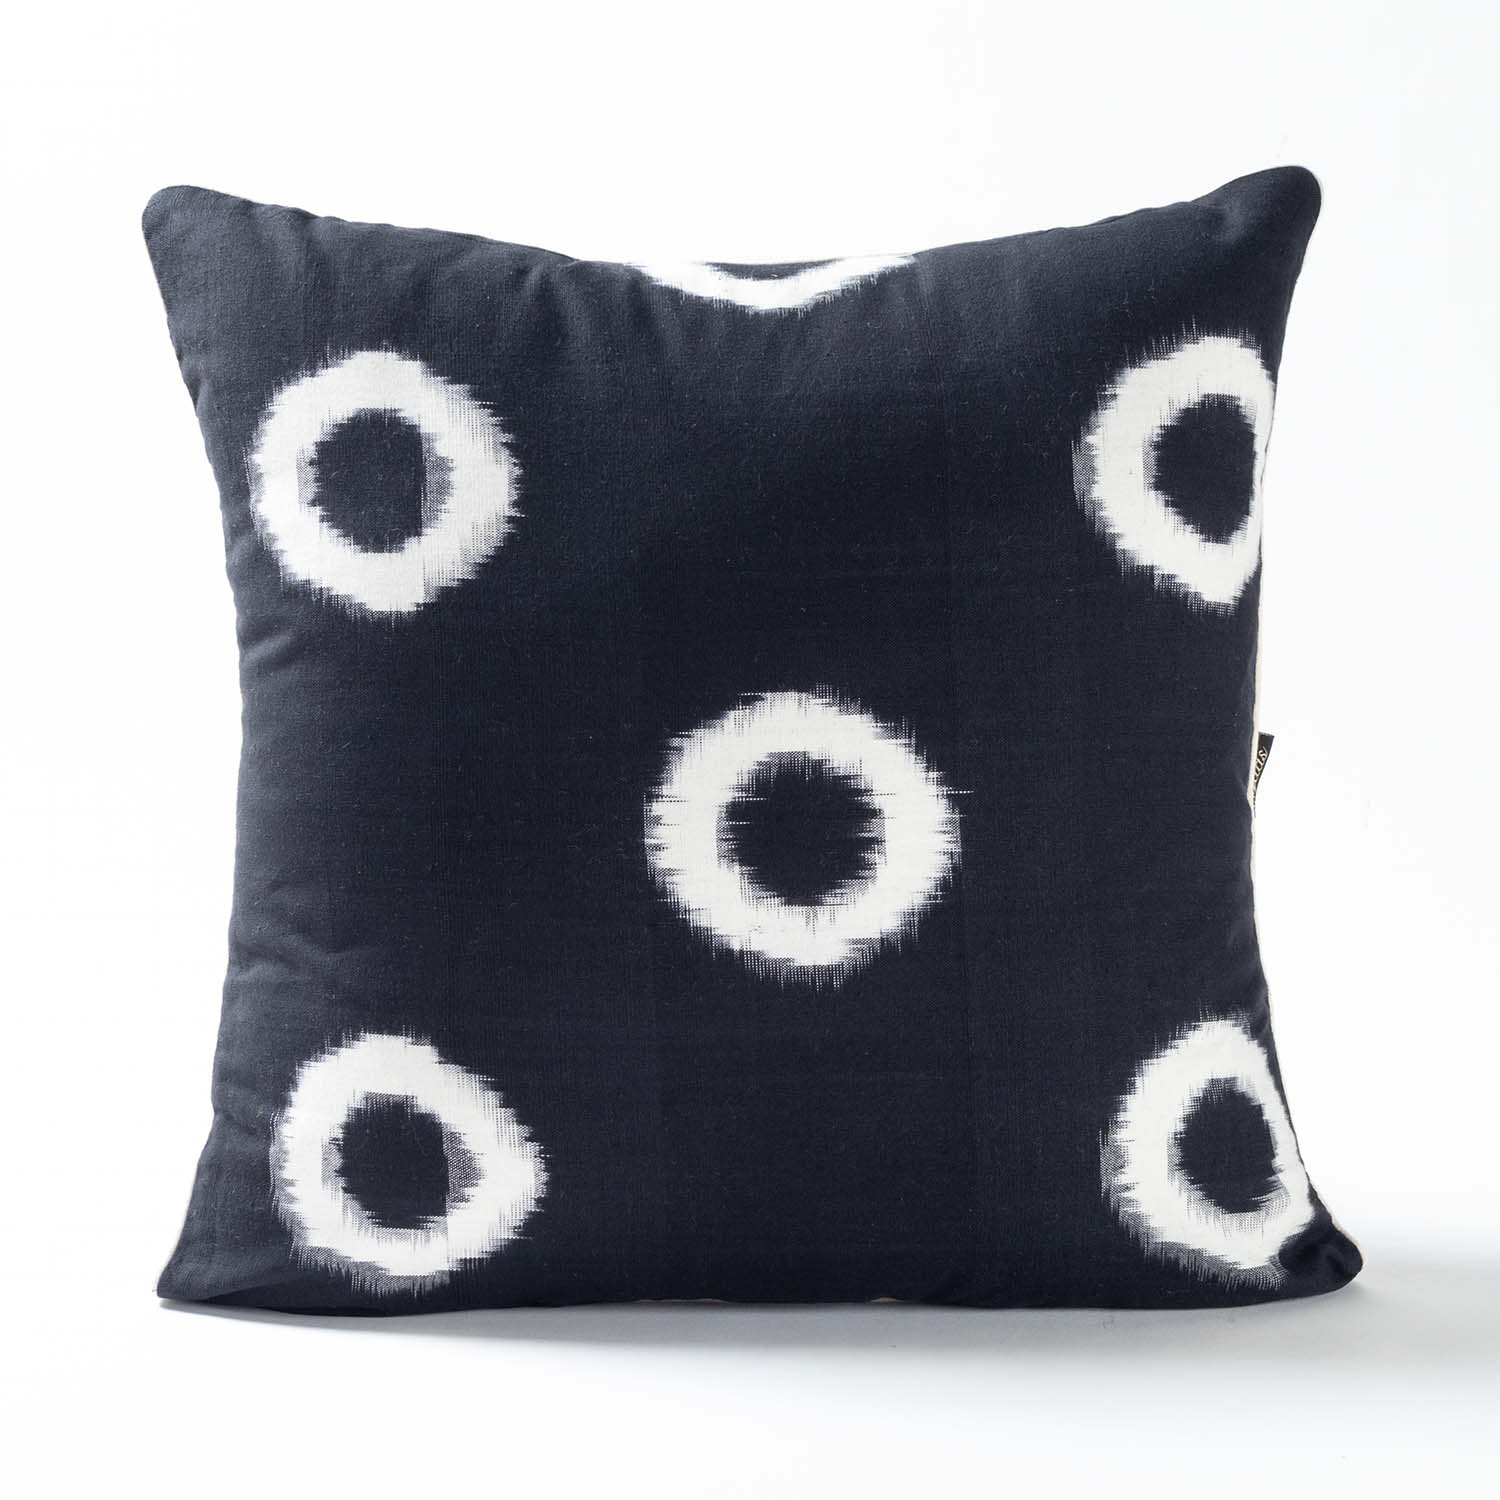 Handwoven Ikat Cushion Cover Set of 2 - 18x18